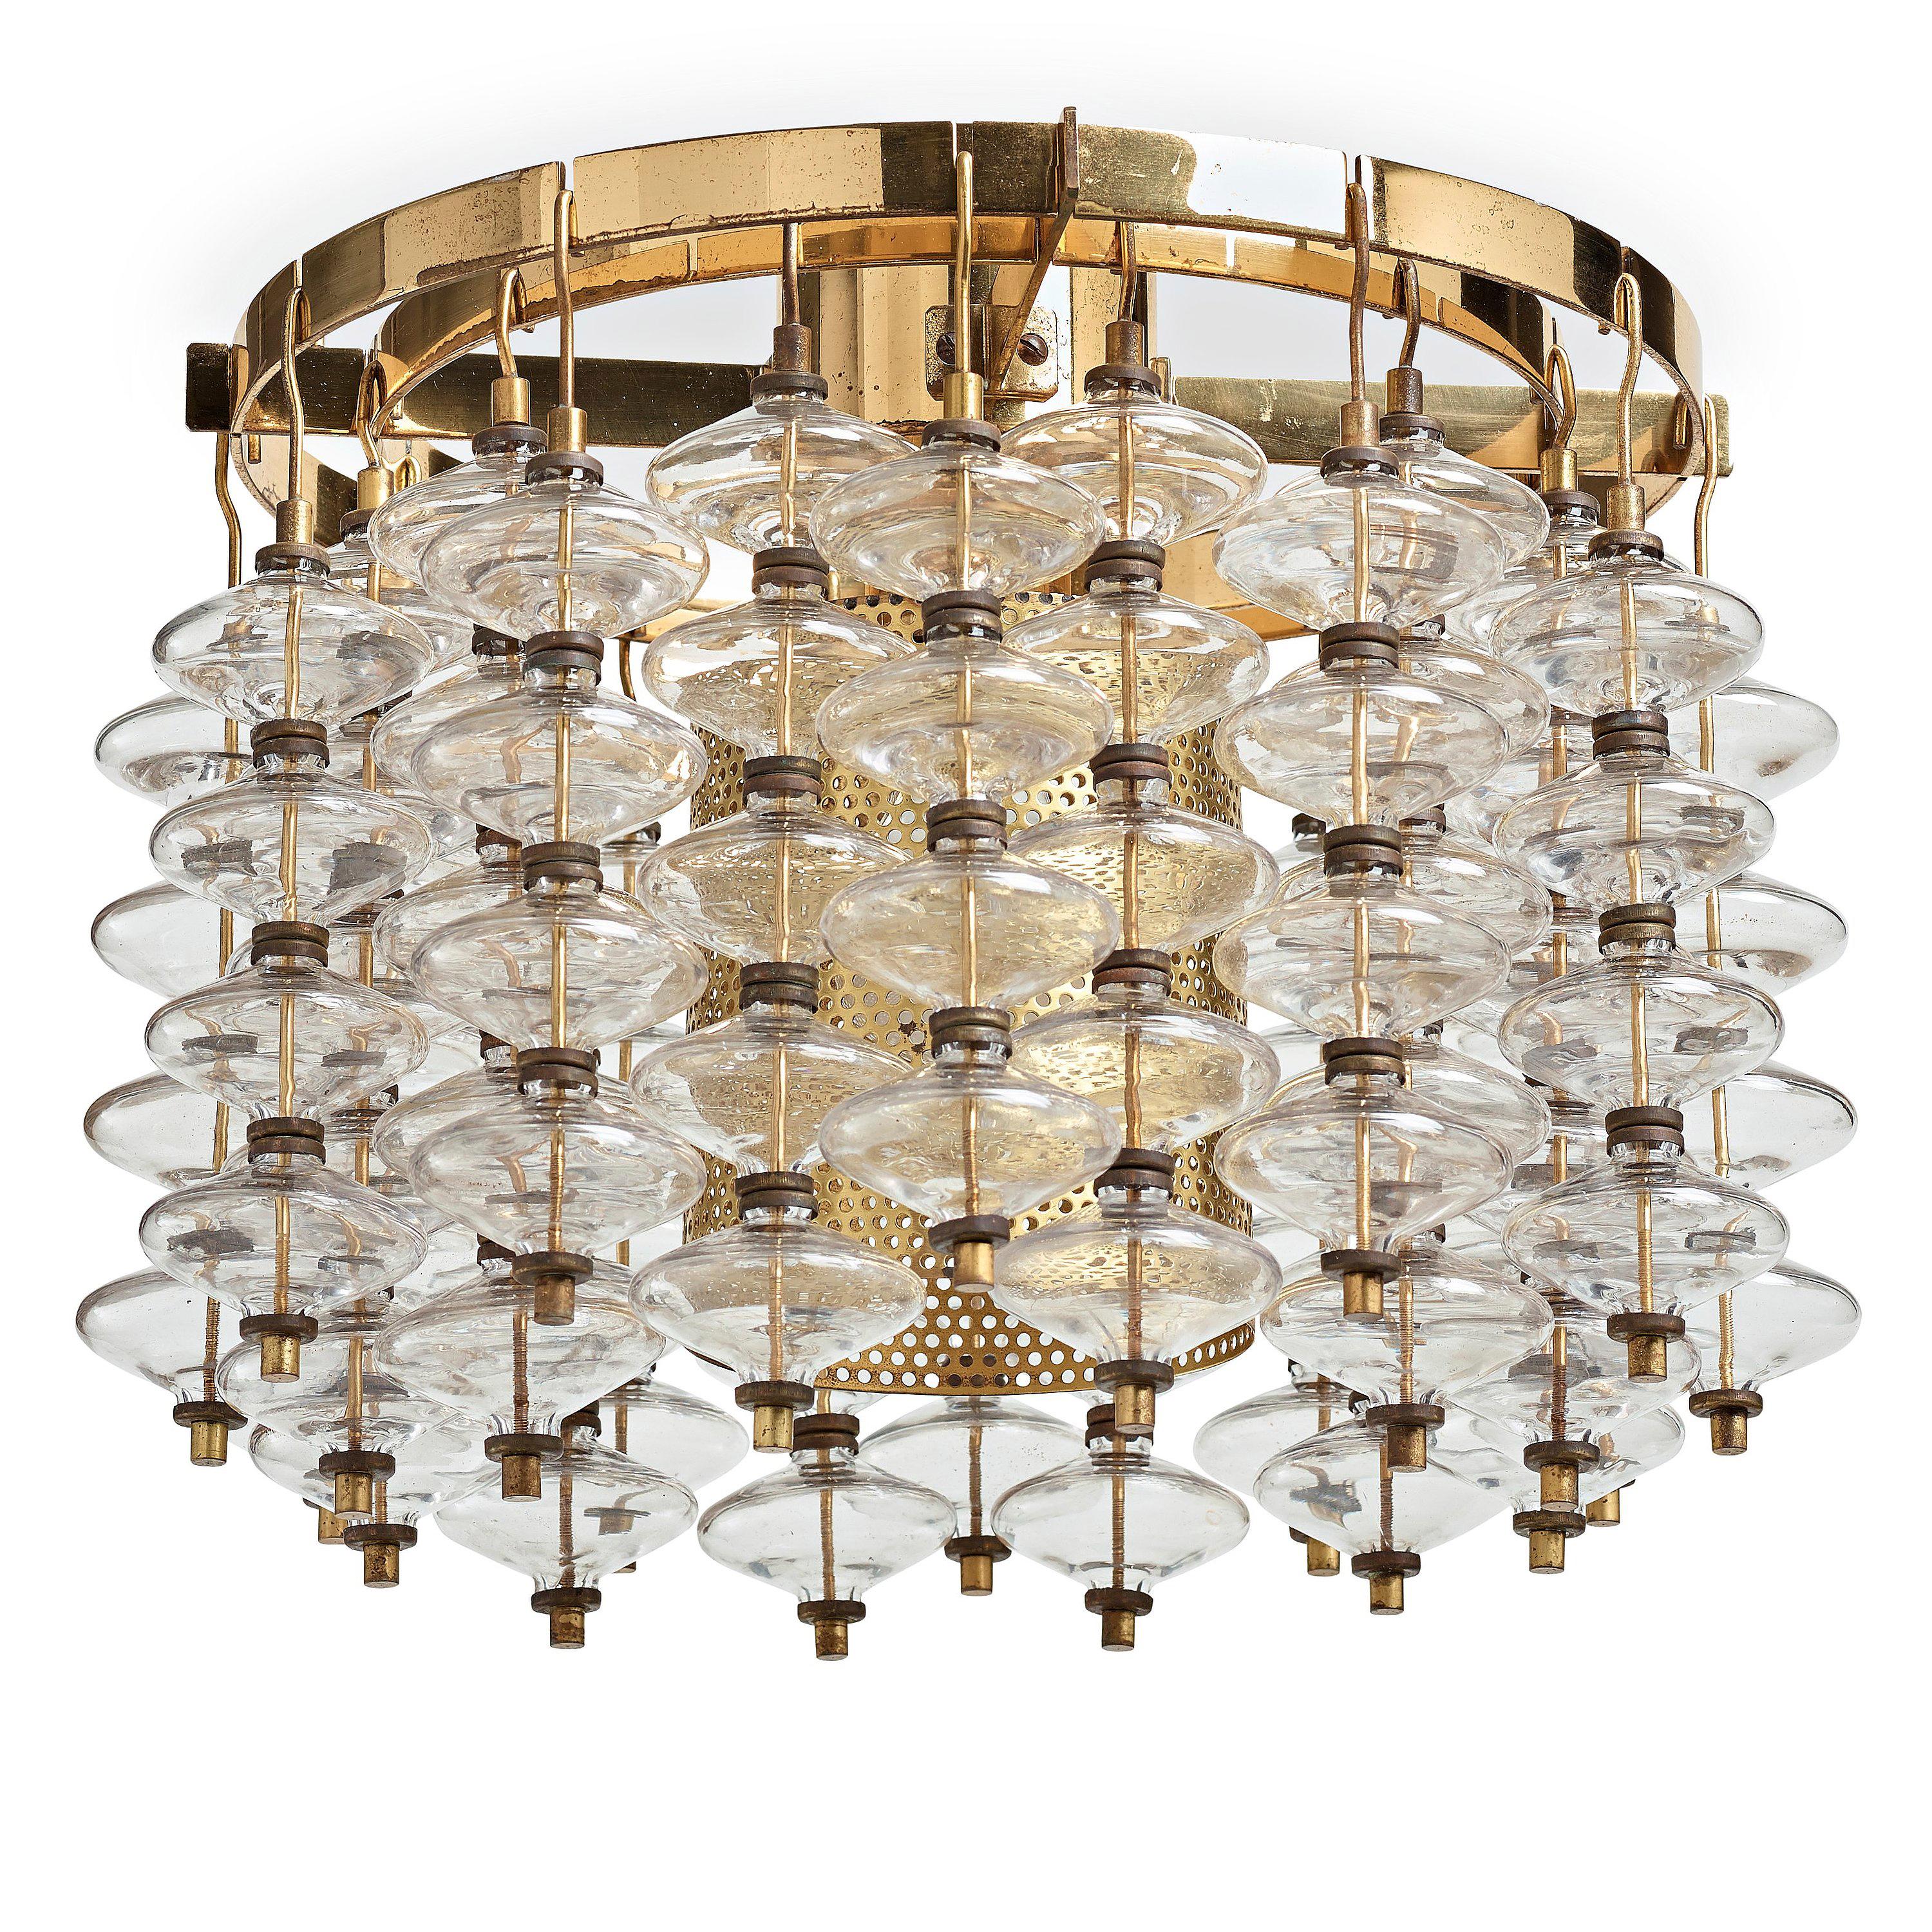 Scandinavian Mid-Century Modern chandelier T-581 by Hans-Agne Jakobsson Markaryd, Sweden. Frame in polished brass. Glass details strung on brass thread. Wire suspension. 
Stunning glass and brass circular chandelier made about 1966. Clear smooth